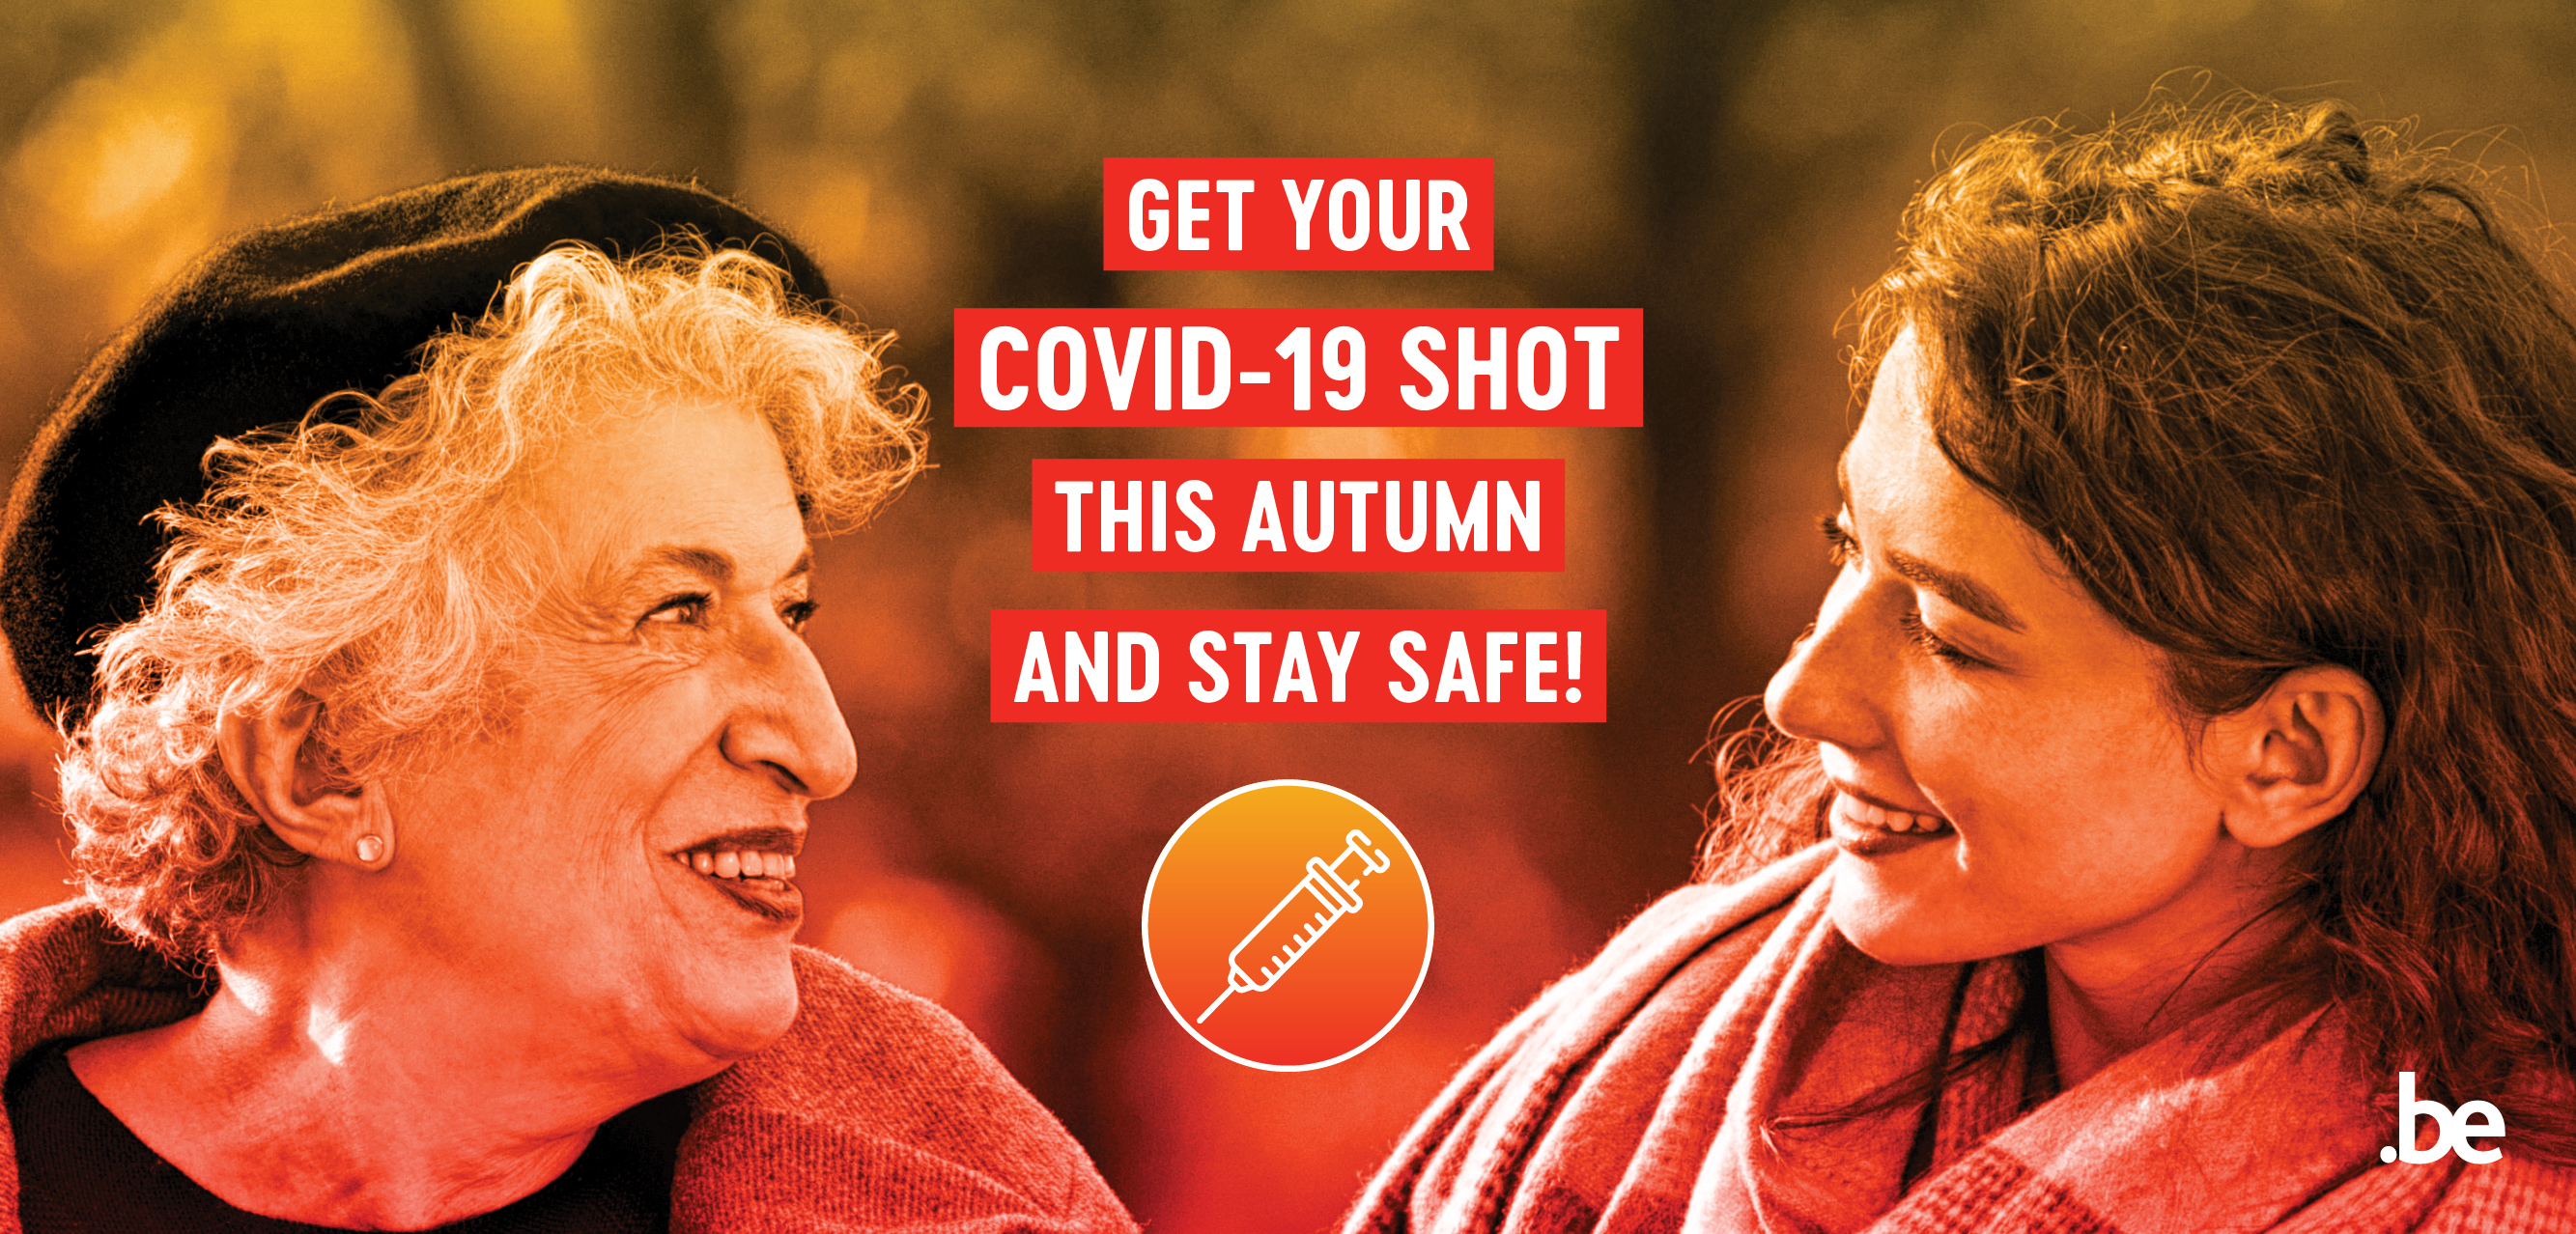 Get your Covid-19-shot this autumn and stay safe.